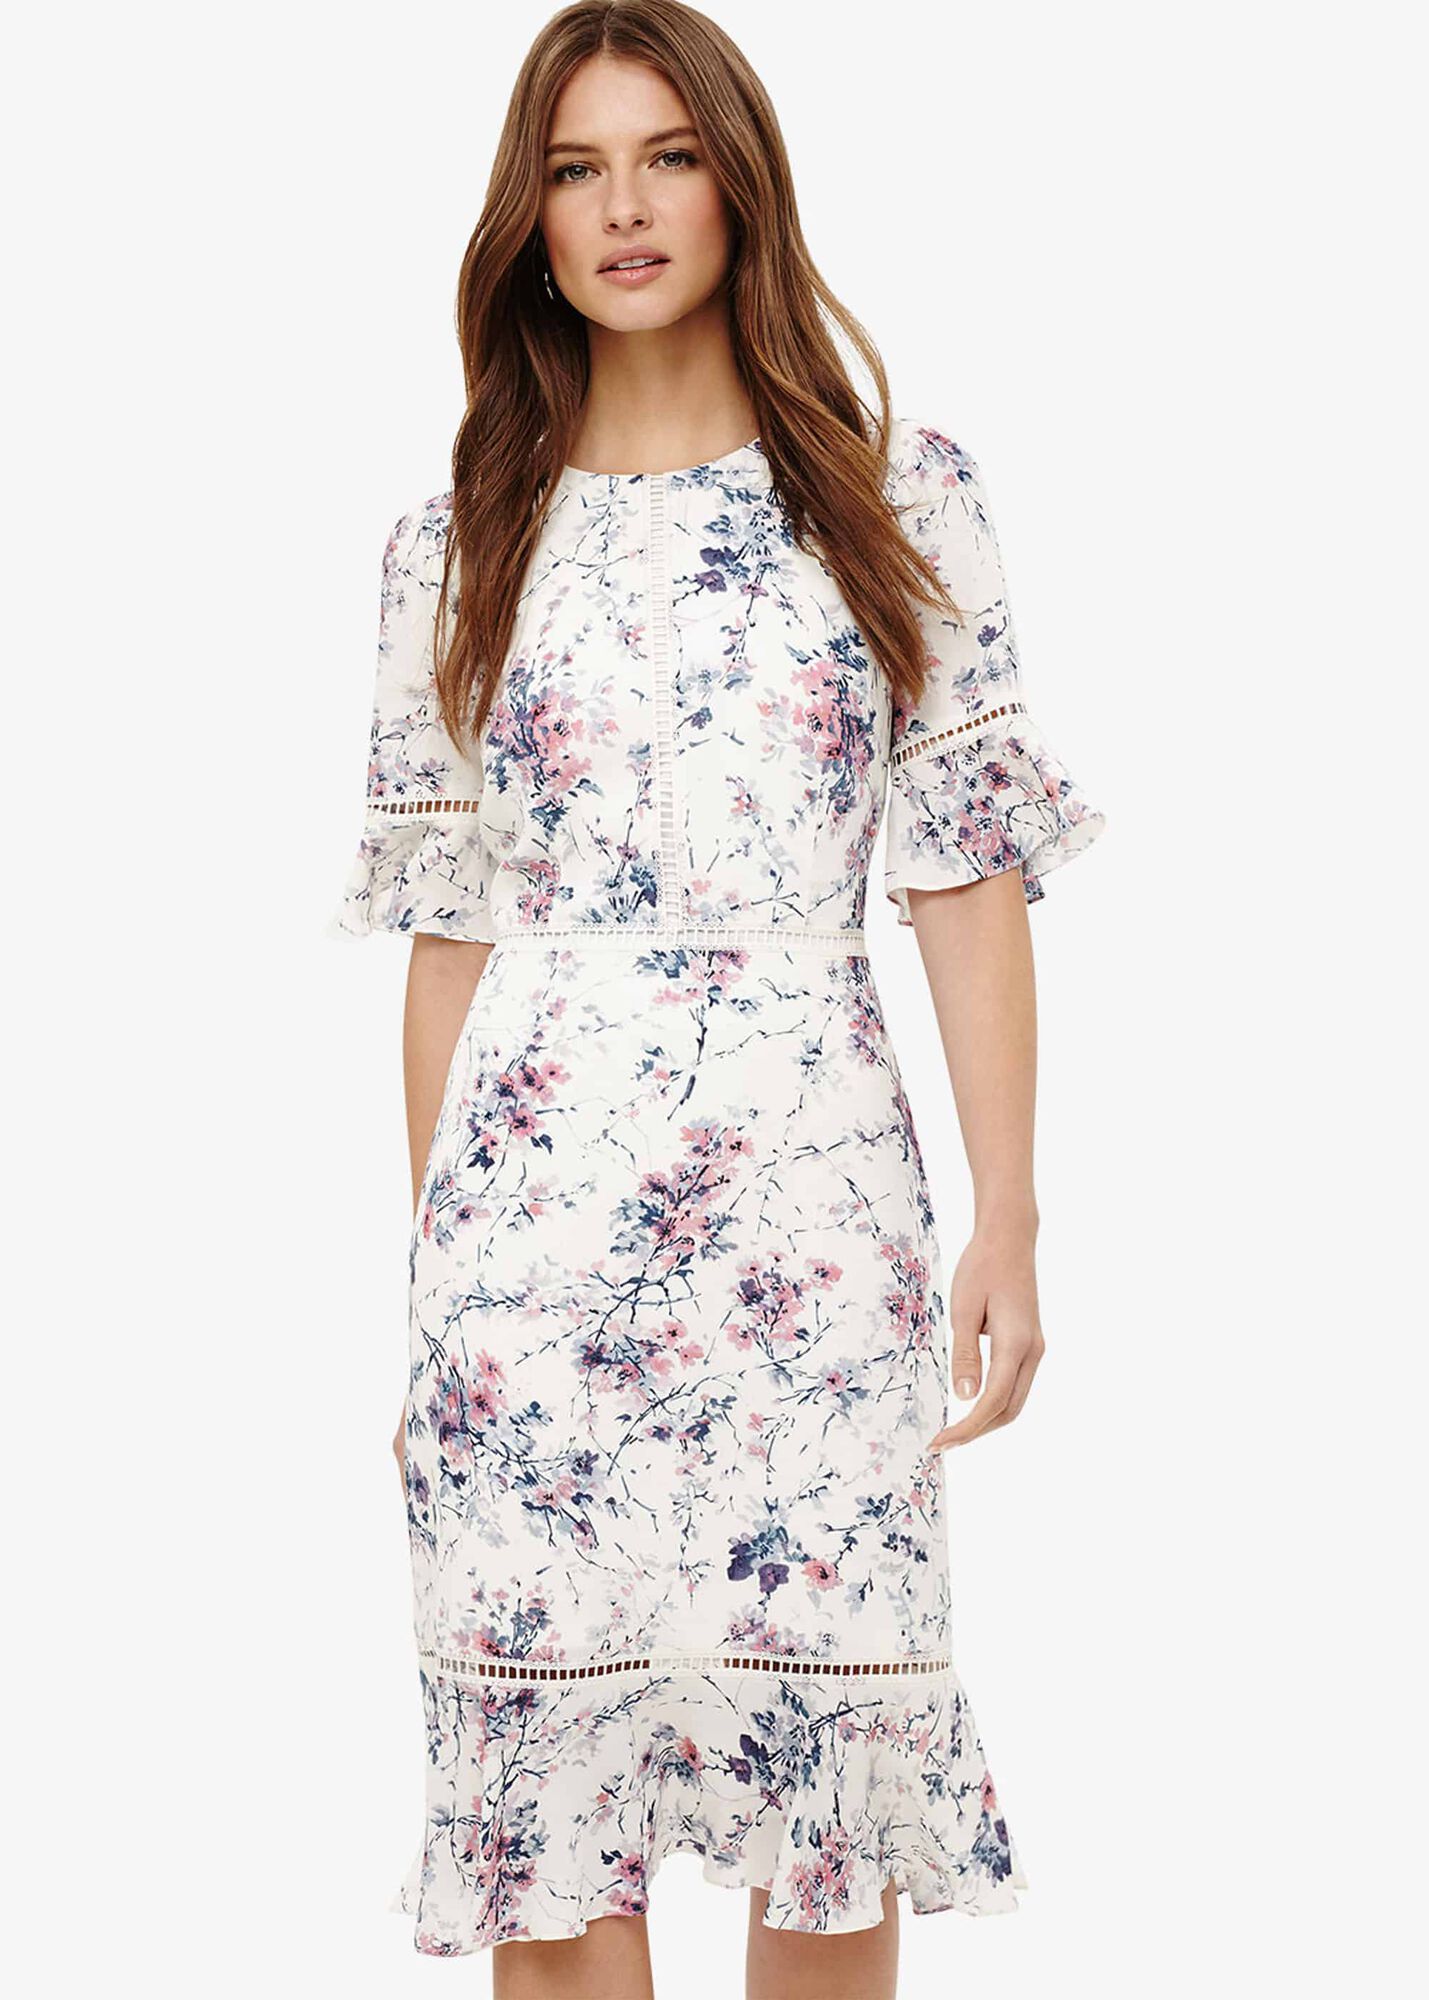 Paloma Floral Print Dress | Phase Eight